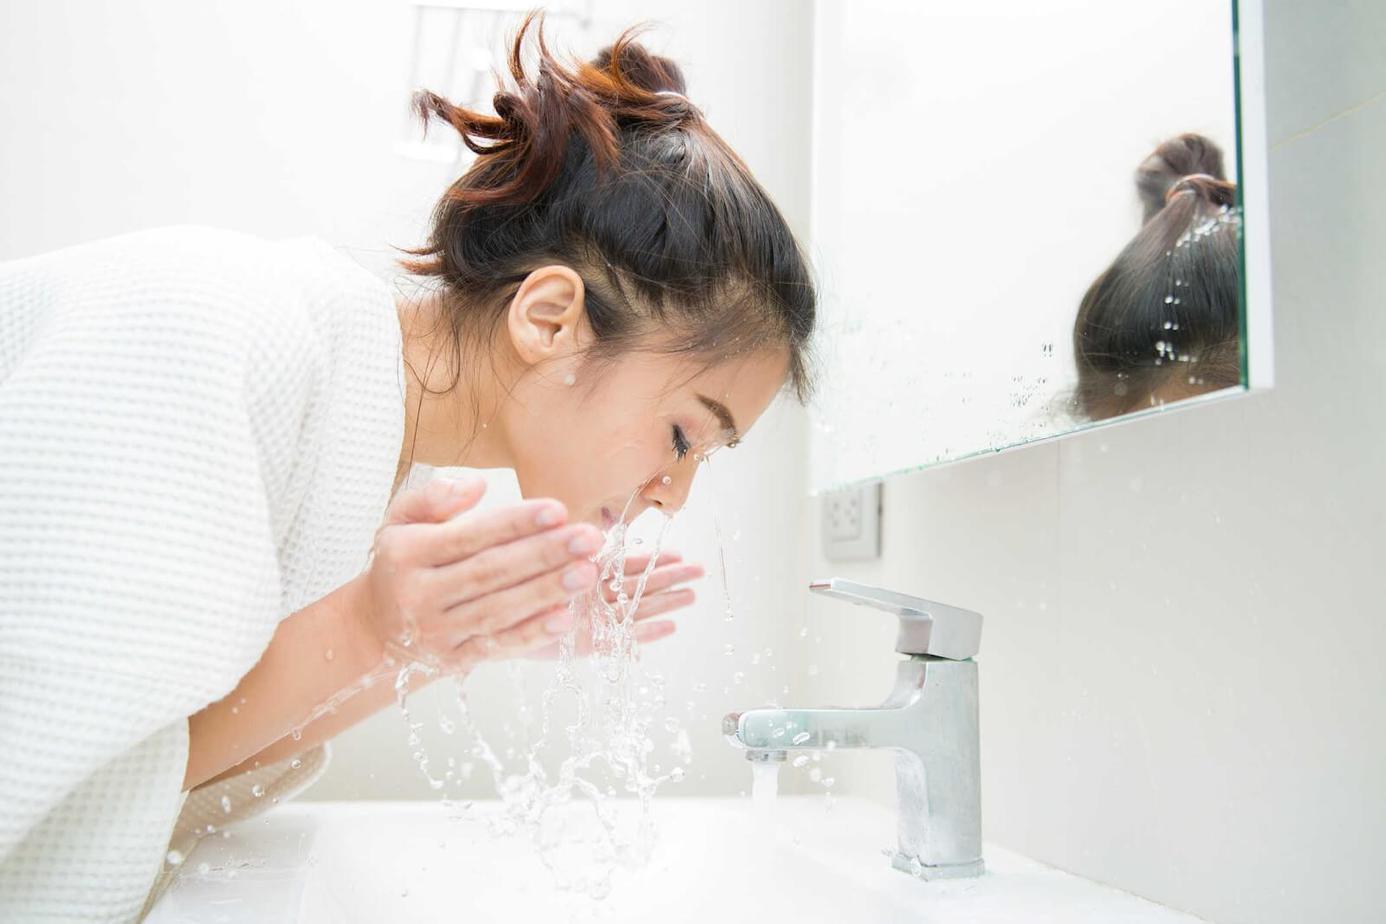 Washing Your Face Properly Is the First Step of Care for Beautiful Skin You've heard